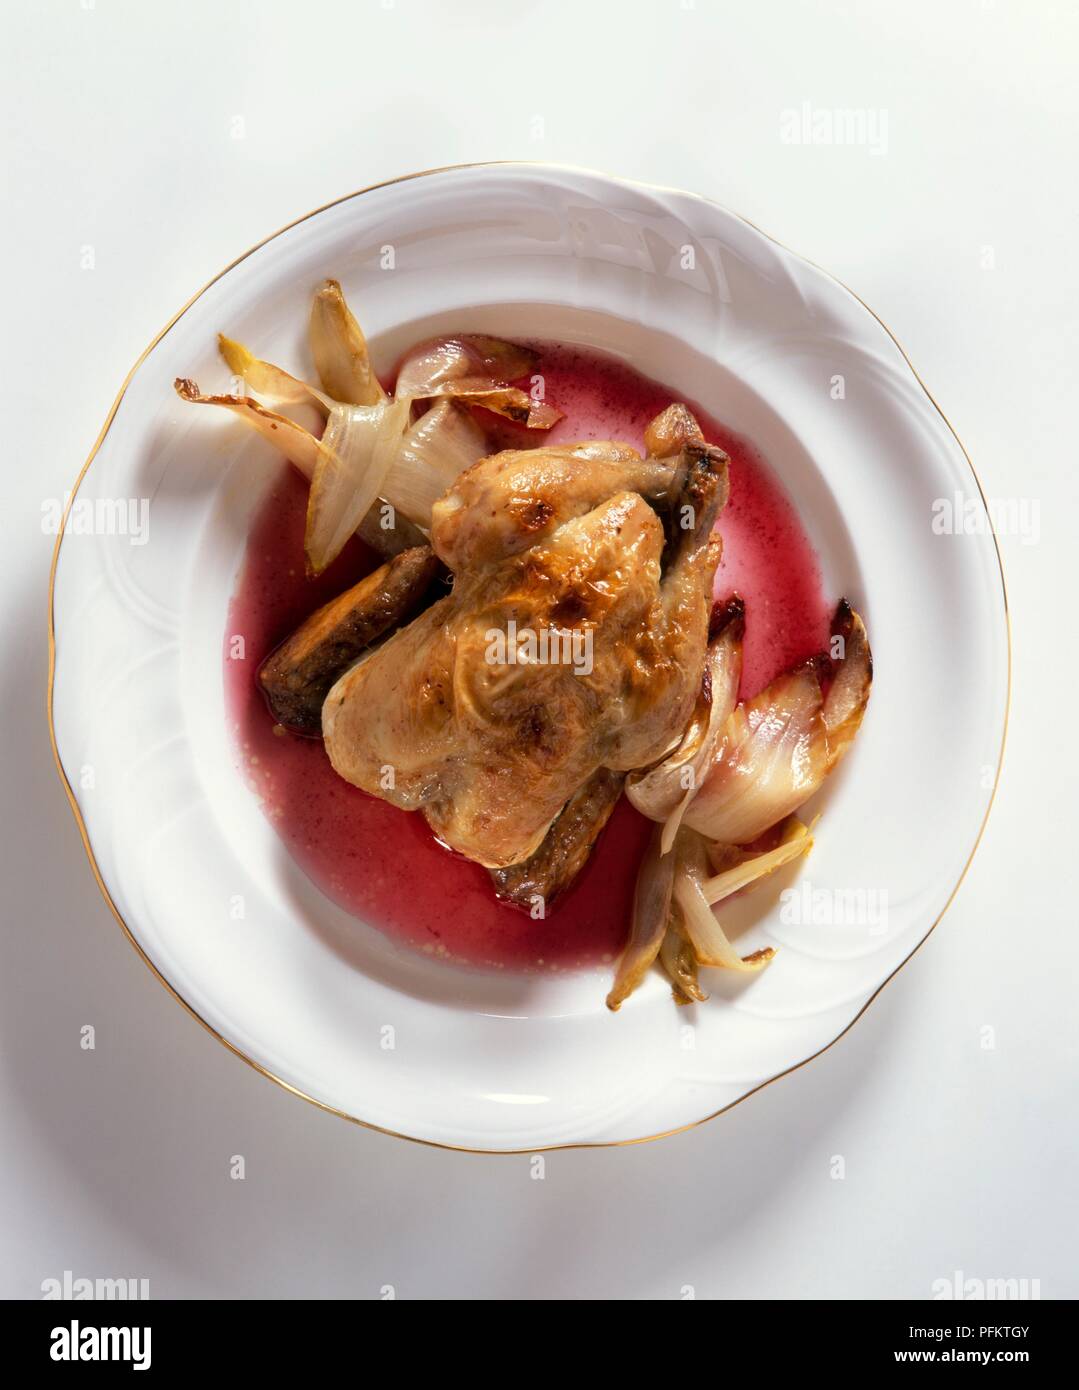 Poussin with braised chicory and red vinegar sauce, served on a plate Stock Photo